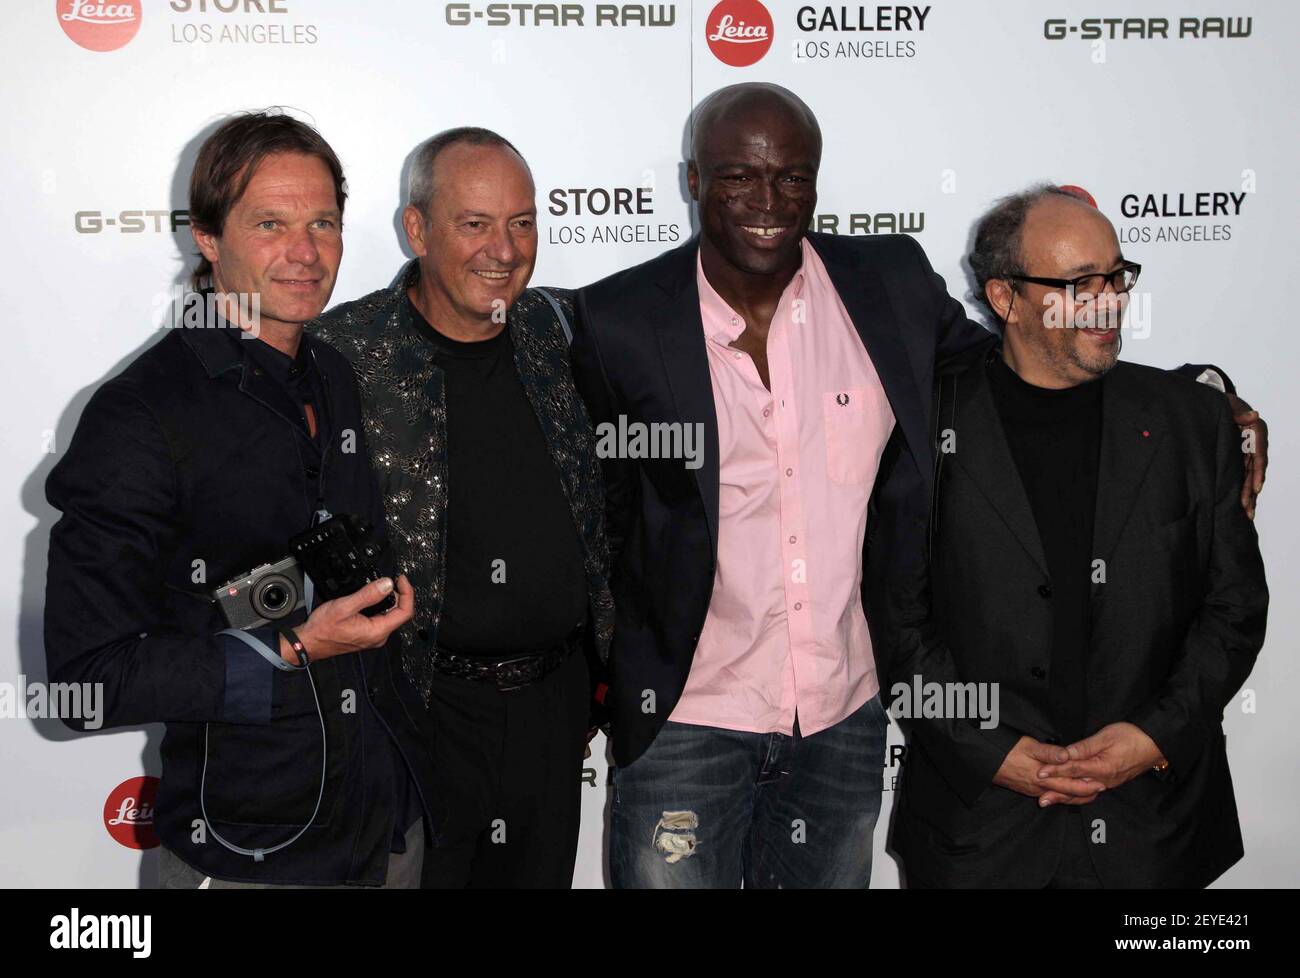 20 June 2013 - Los Angeles, California - Sales Steffen Keil, Alfred Schopf,  Seal, Dr. Andreas Kaufmann, Nick Ut. G-Star RAW unveils RAW Leica at the  Leica Store Opening in Los Angeles